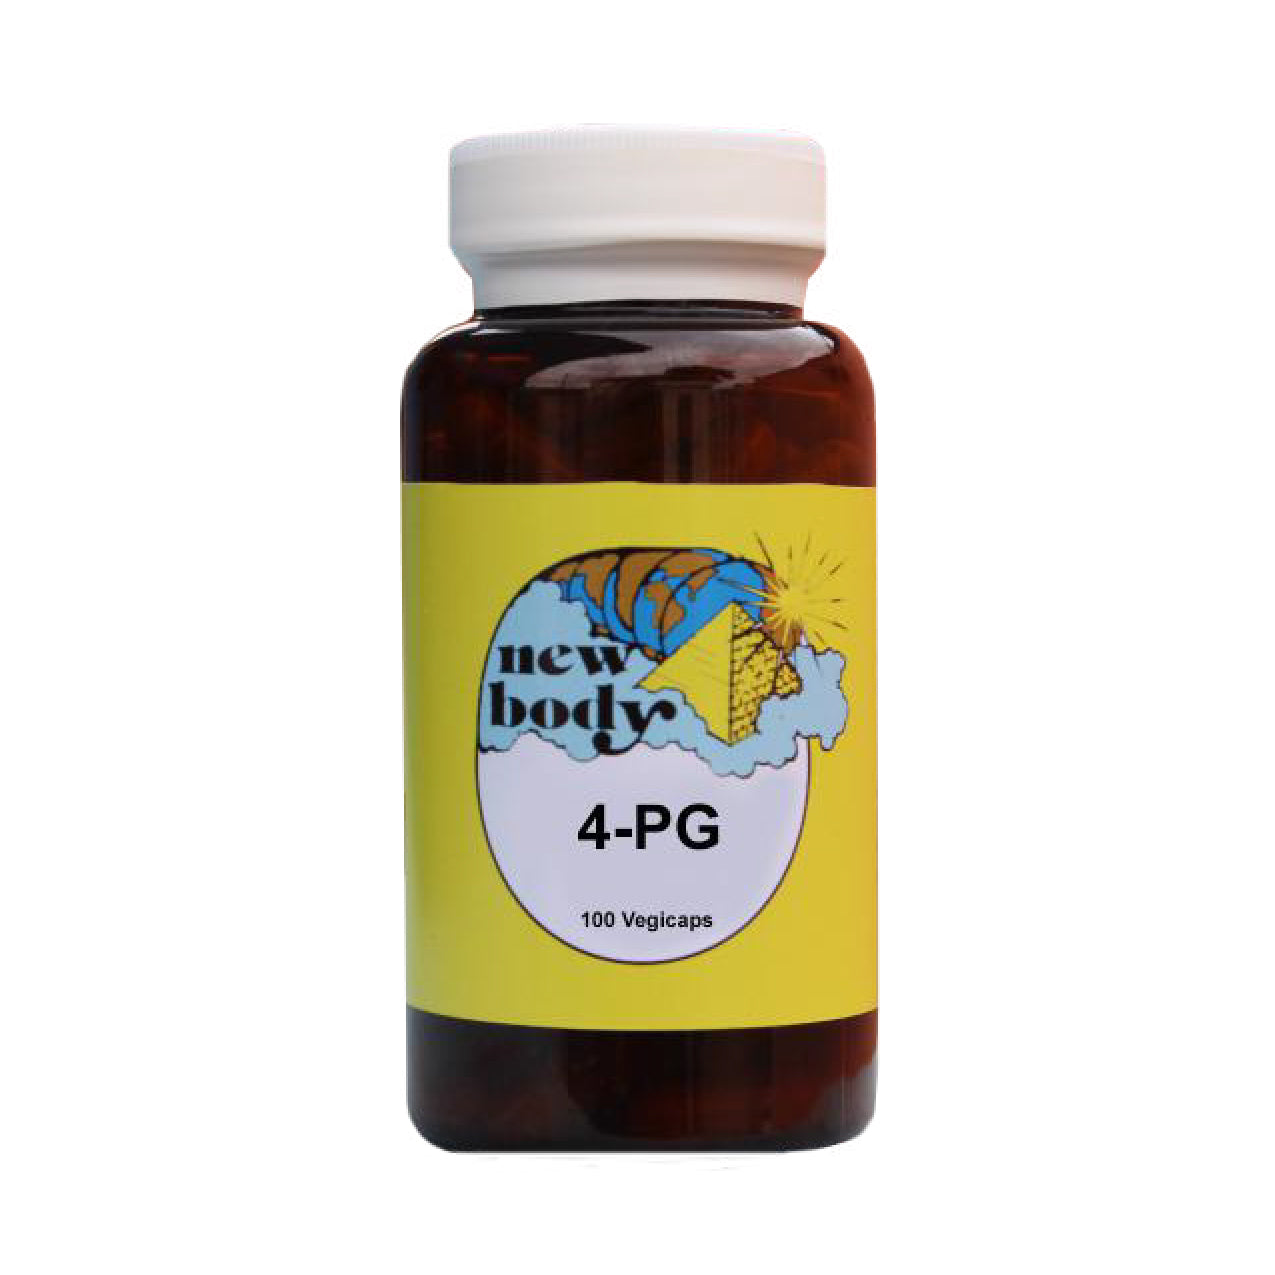 4-PG Herbal Supplement by New Body